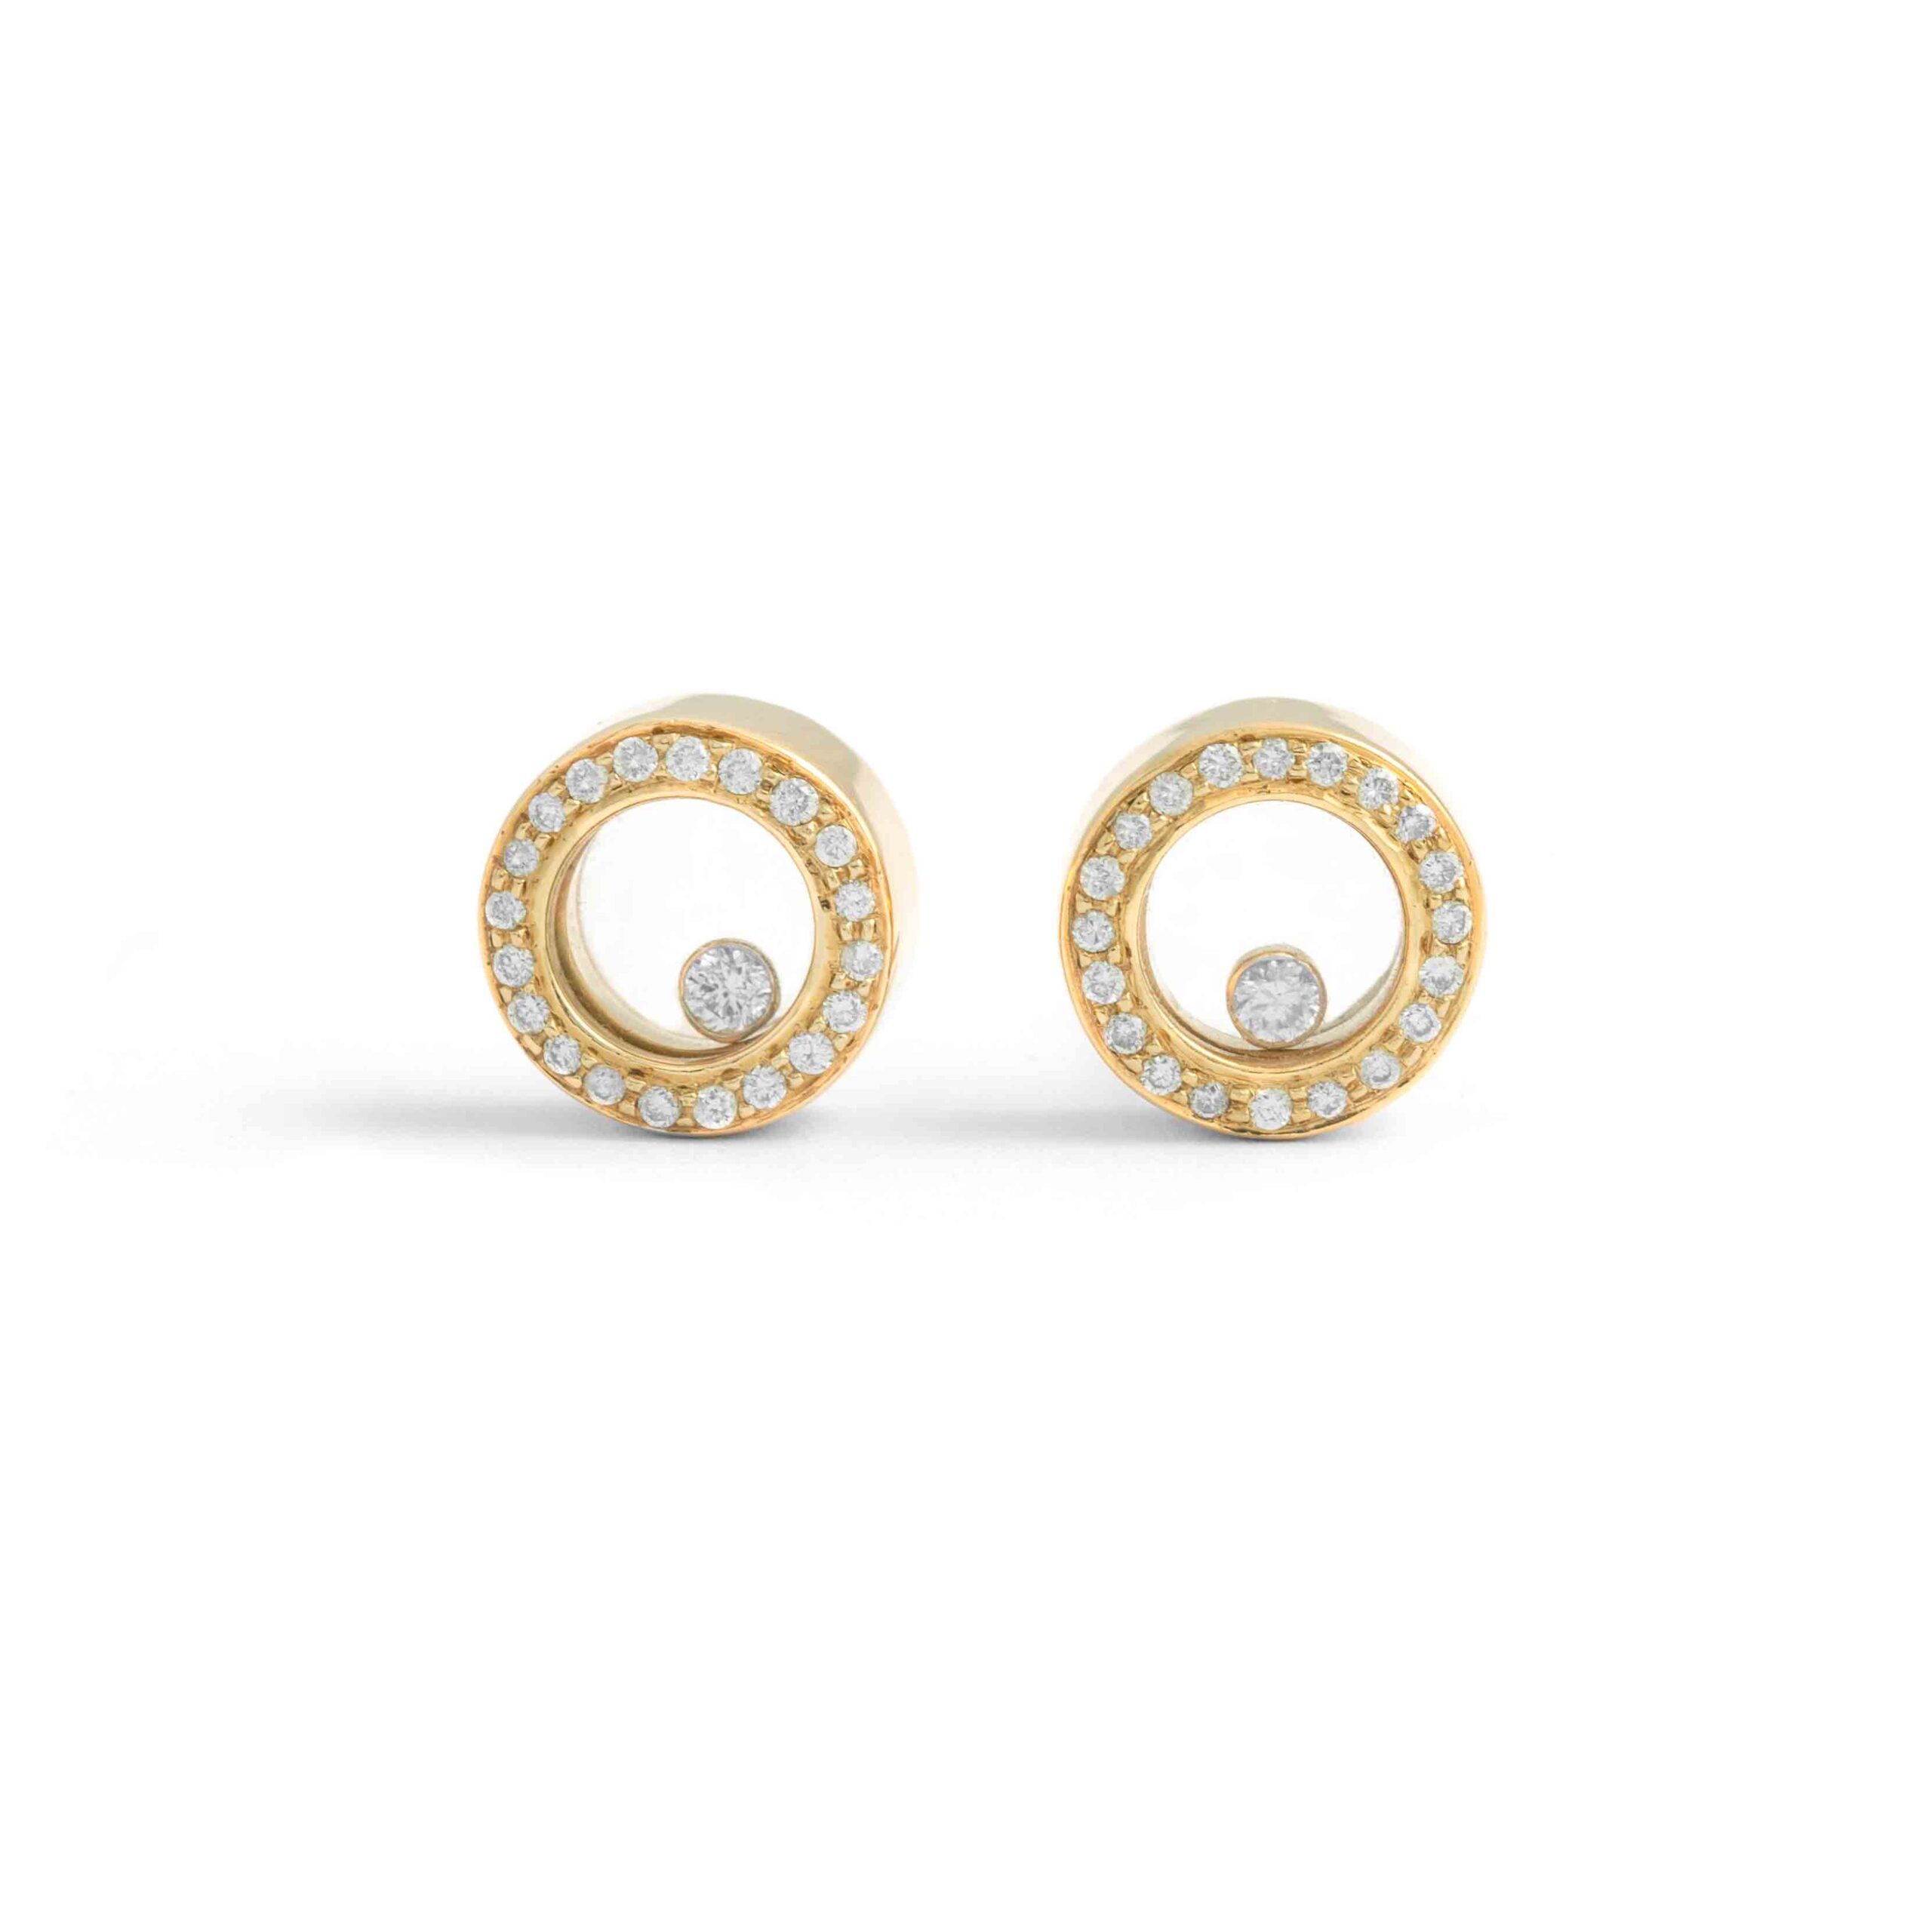 Dancing diamonds gently moving and twirling between two crystals. Diamond Yellow Gold 18K Earrings. Diameter: 1.00 centimeters. Total weight: 6.36 grams